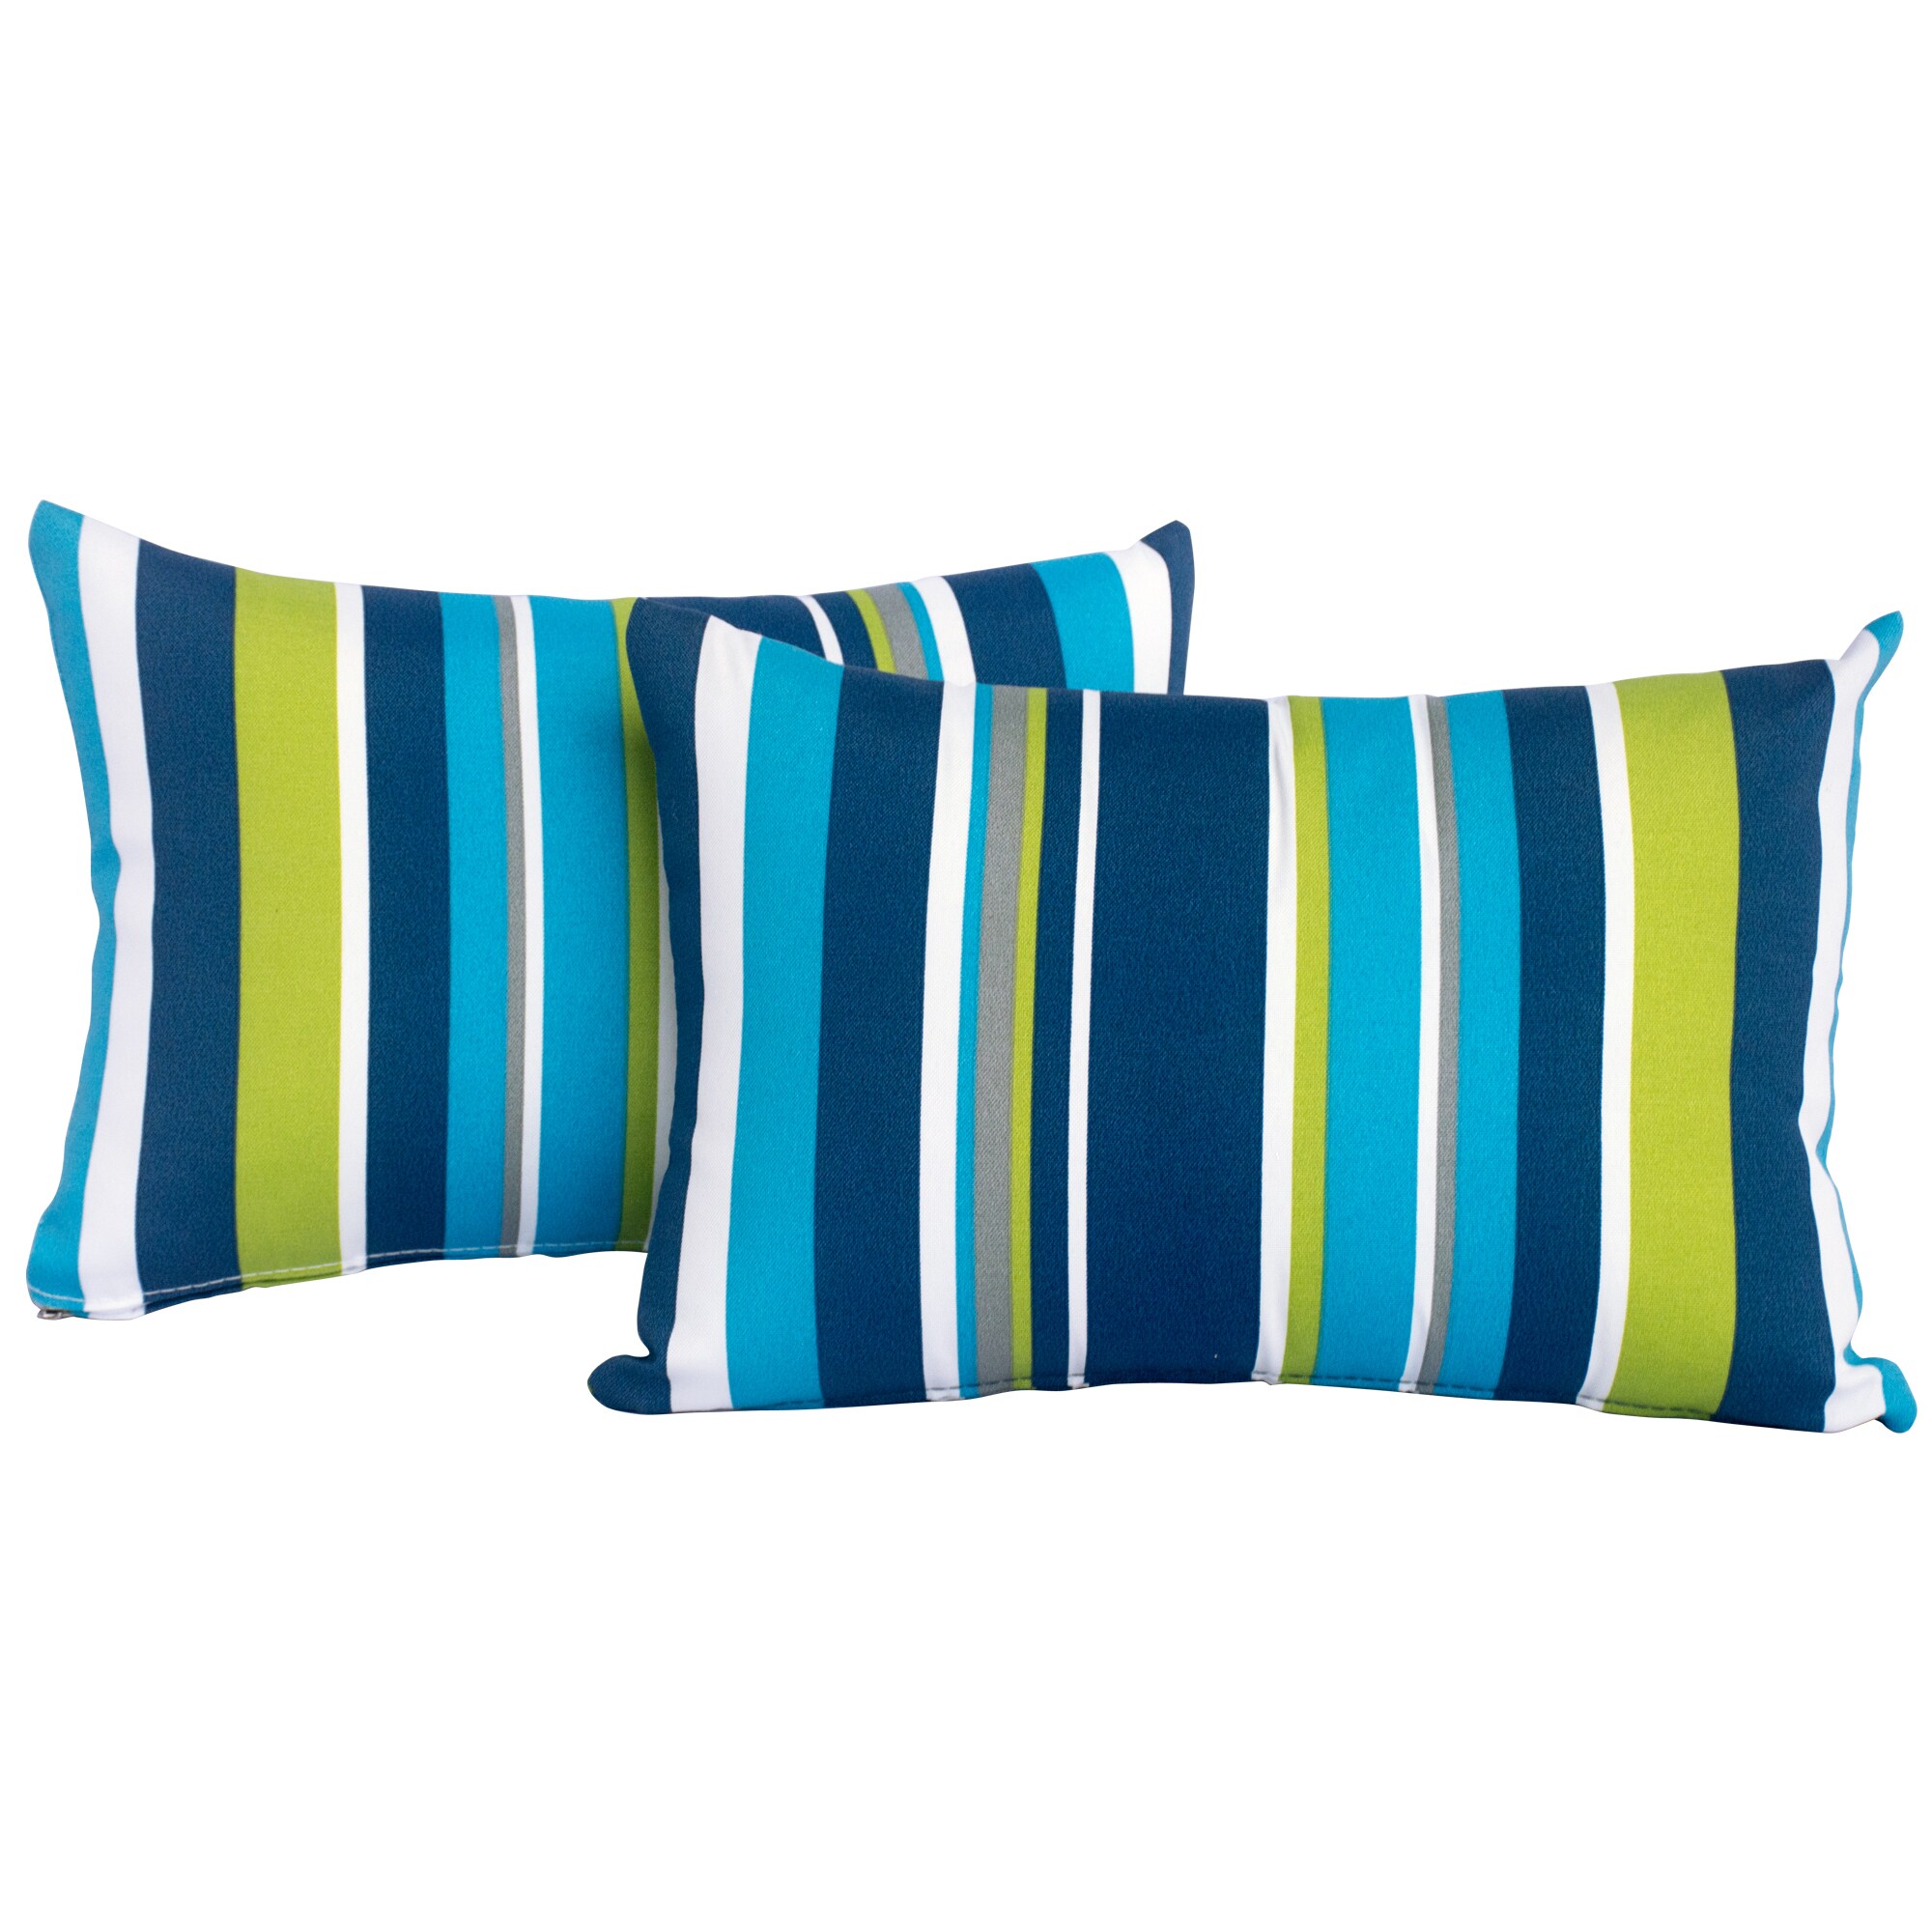 Pack of 2 Outdoor Decorative Throw Pillows 12 x 18 inch Stripe Aqua Lumbar  Pillows (12 x 18 Stripe, Aqua) 